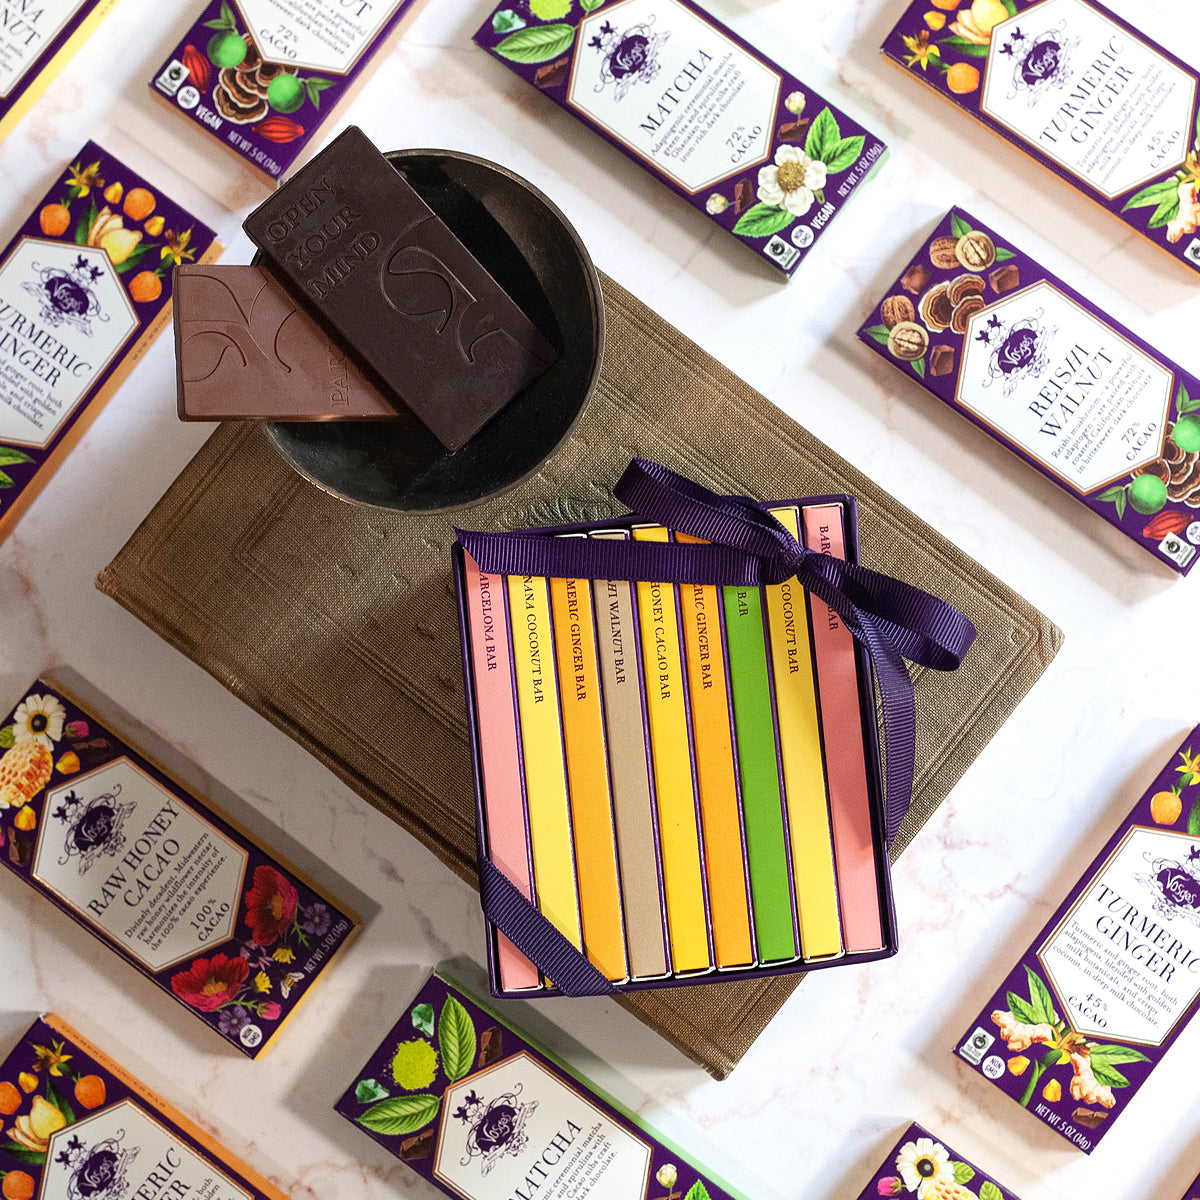 vosges-haut-chocolat-blog/the-best-stocking-stuffer-and-small-gift-ideas